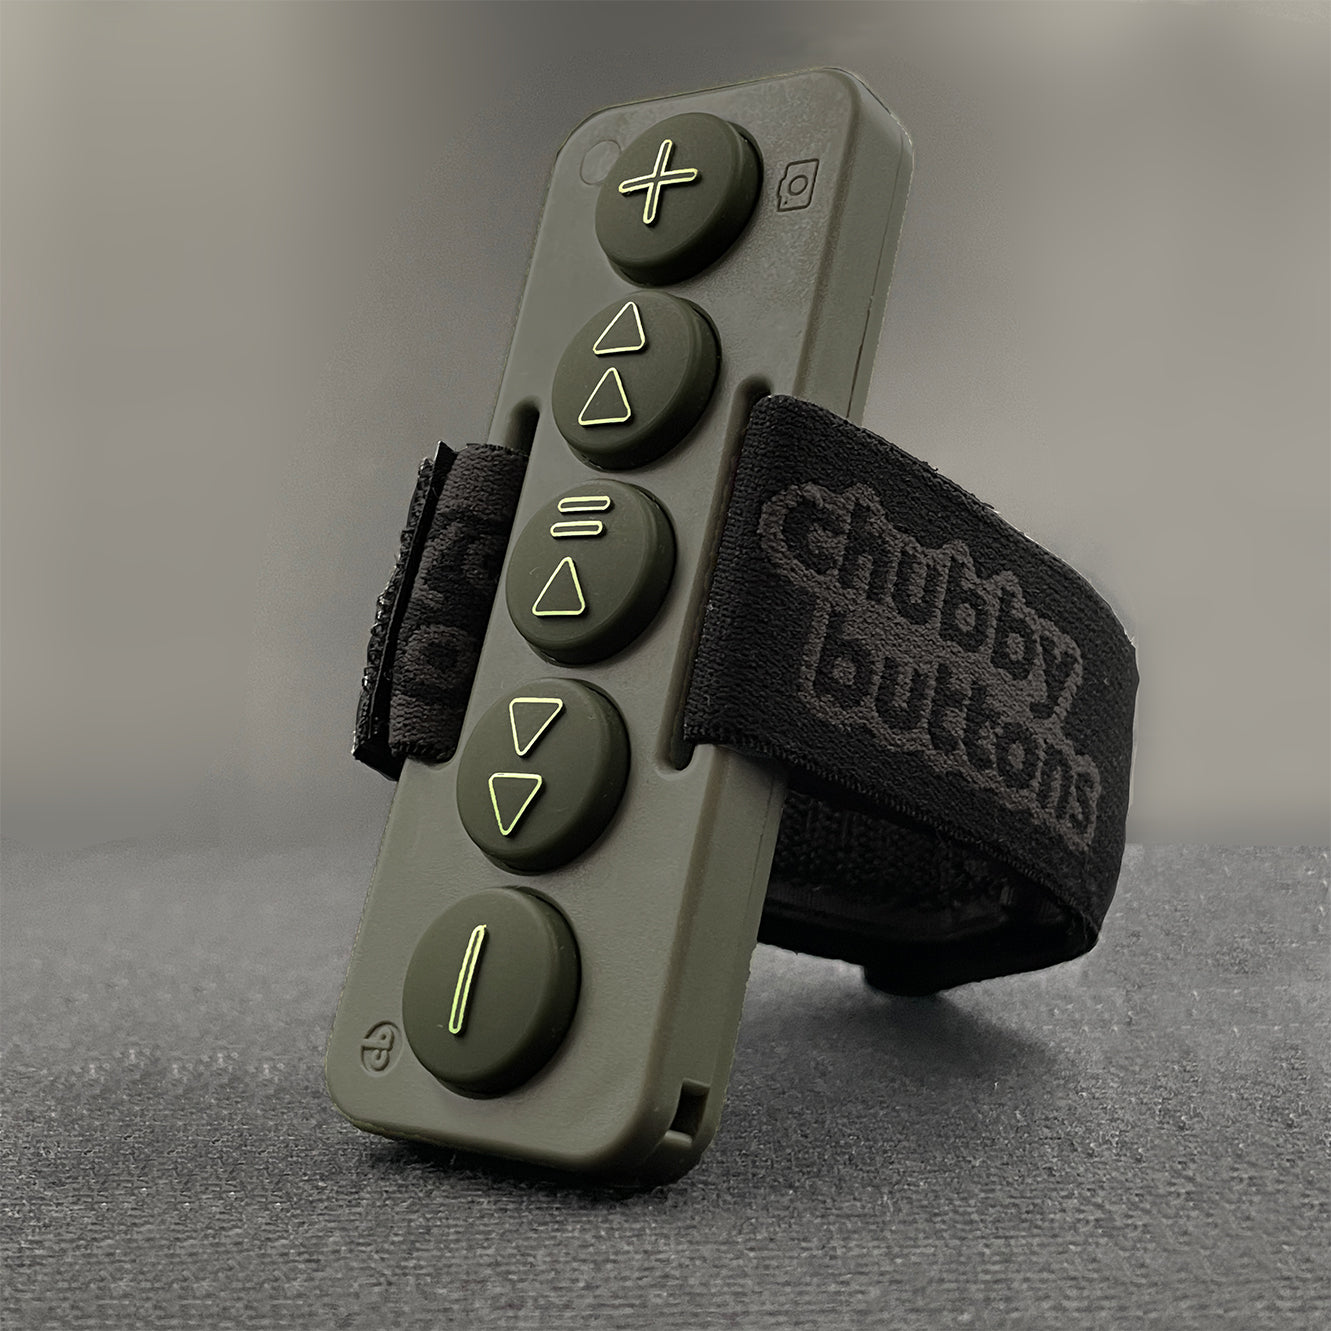 Chubby Buttons 2: The Wearable/Stickable Bluetooth Remote